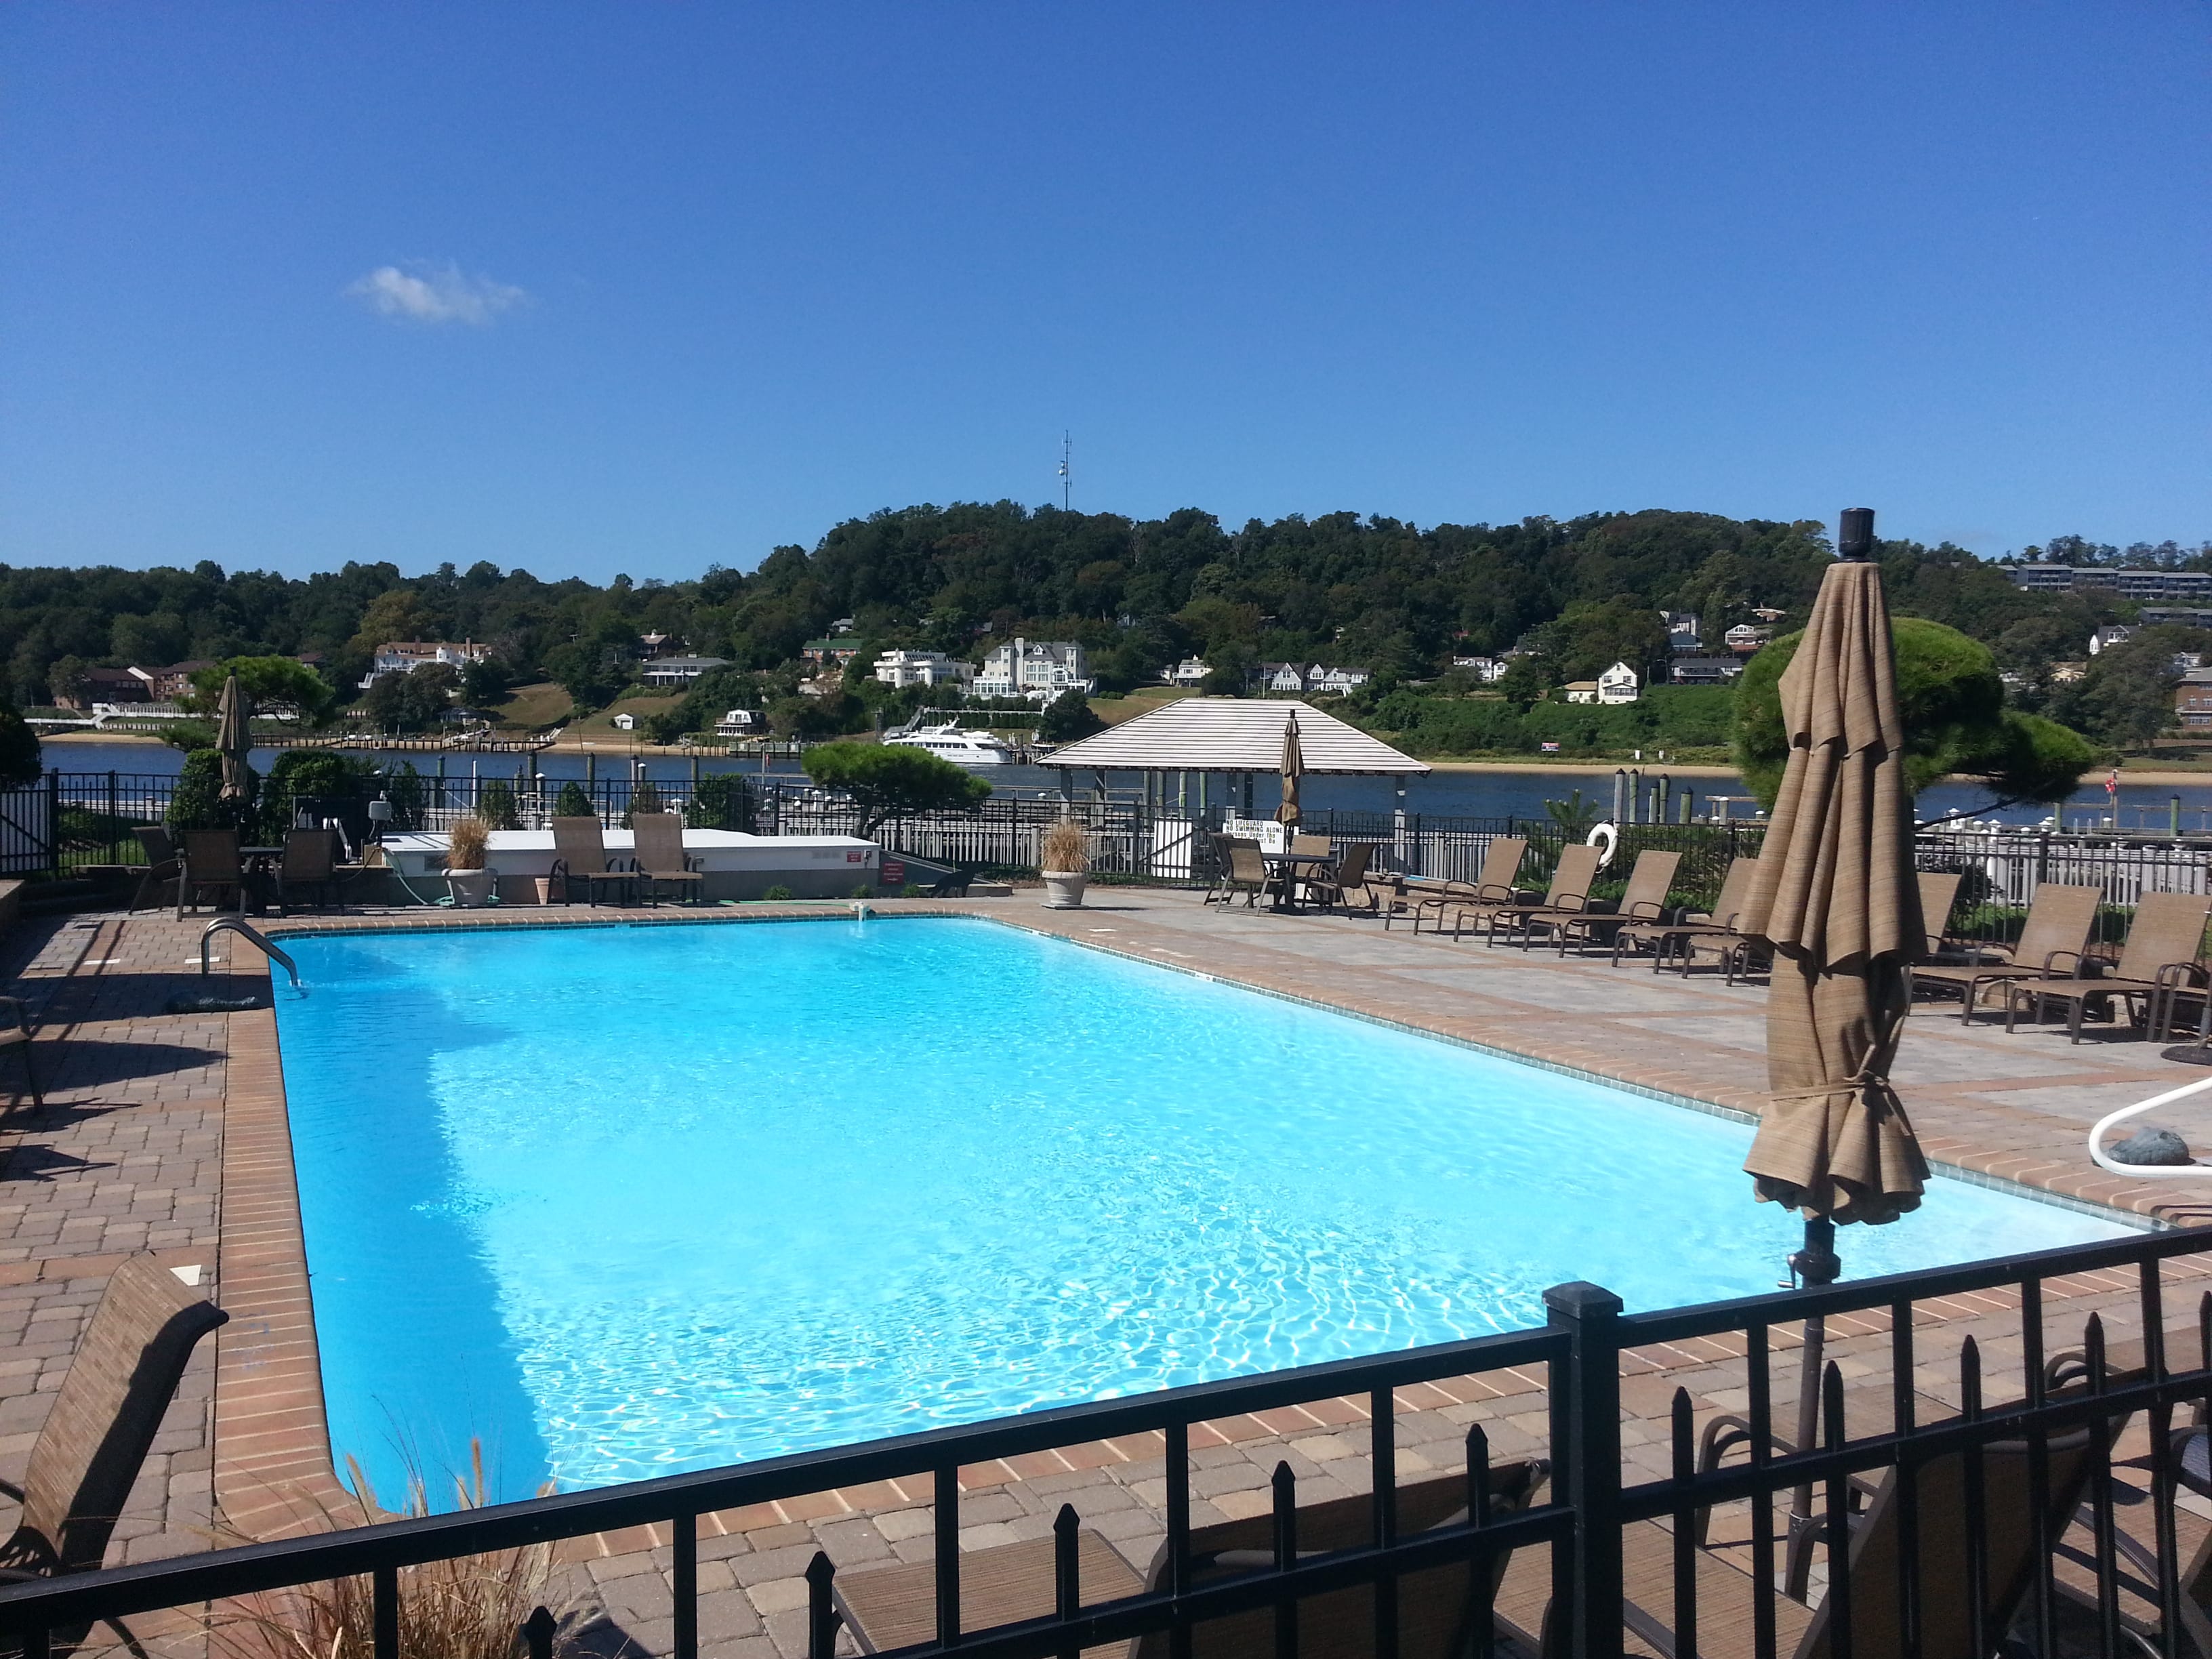 Overlooking the Shrewsbury River, Land's End offers residents this sparkling community pool.